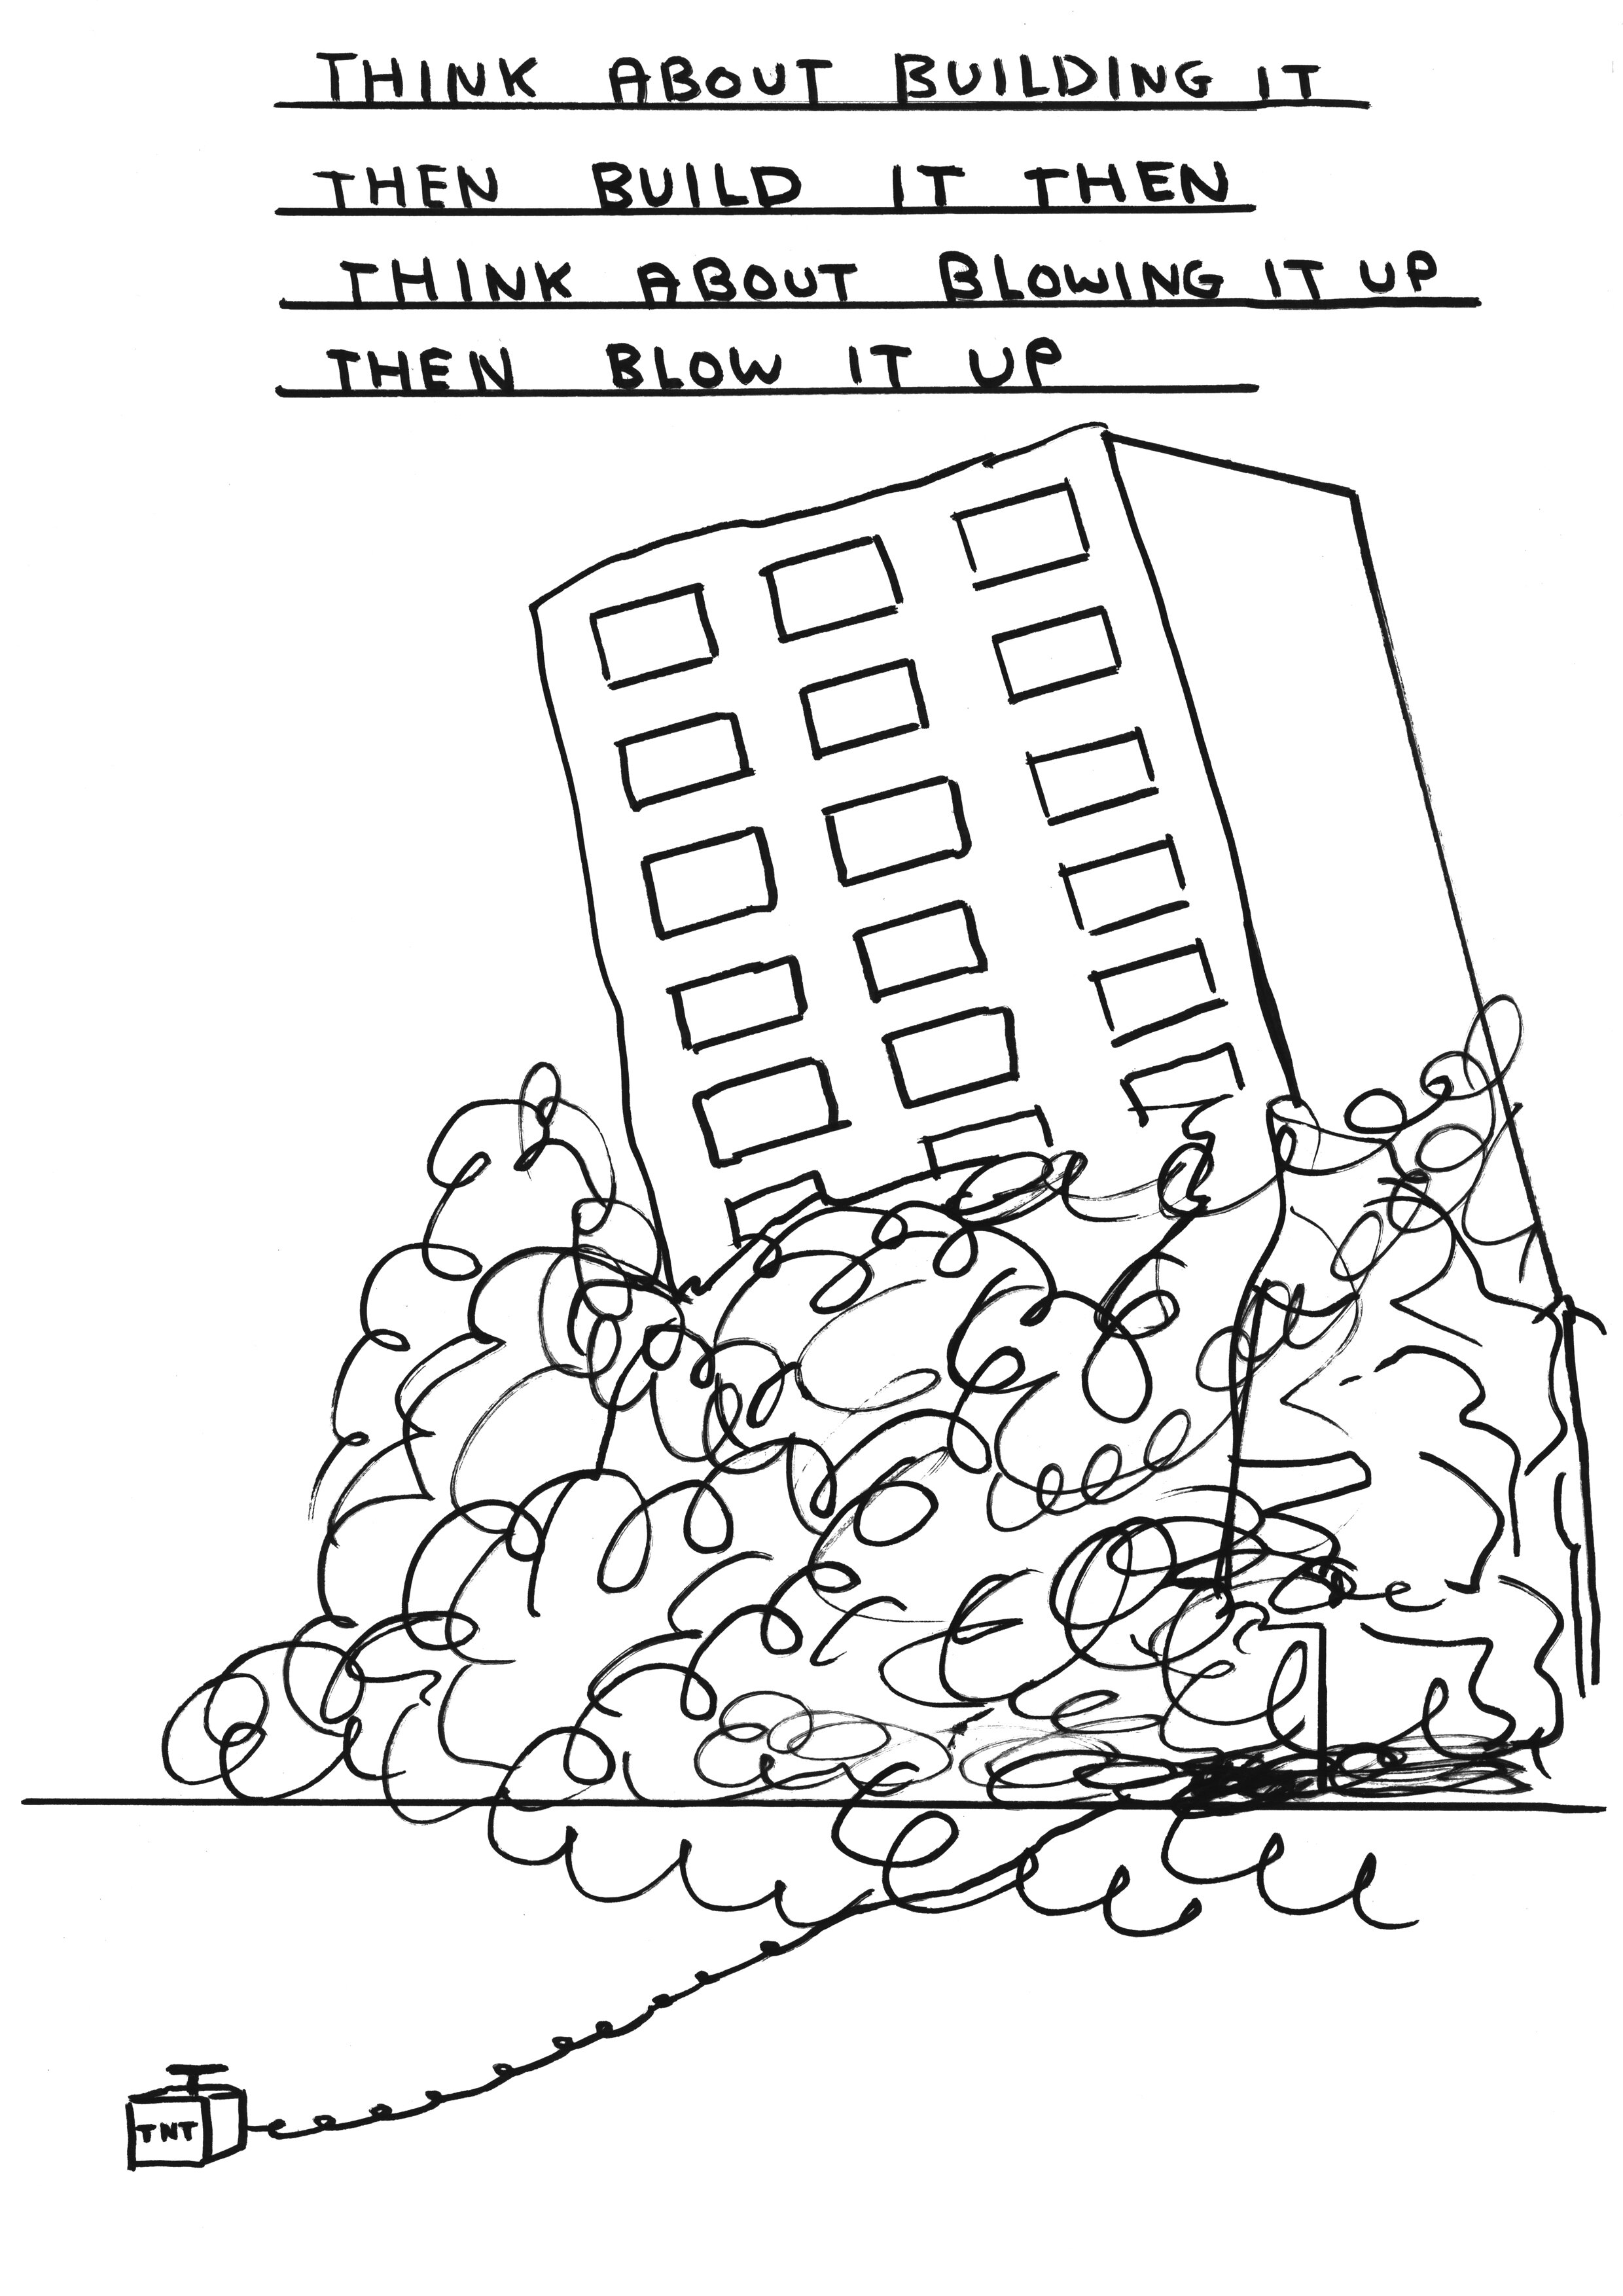 David Shrigley, Untitled (Think about building it)